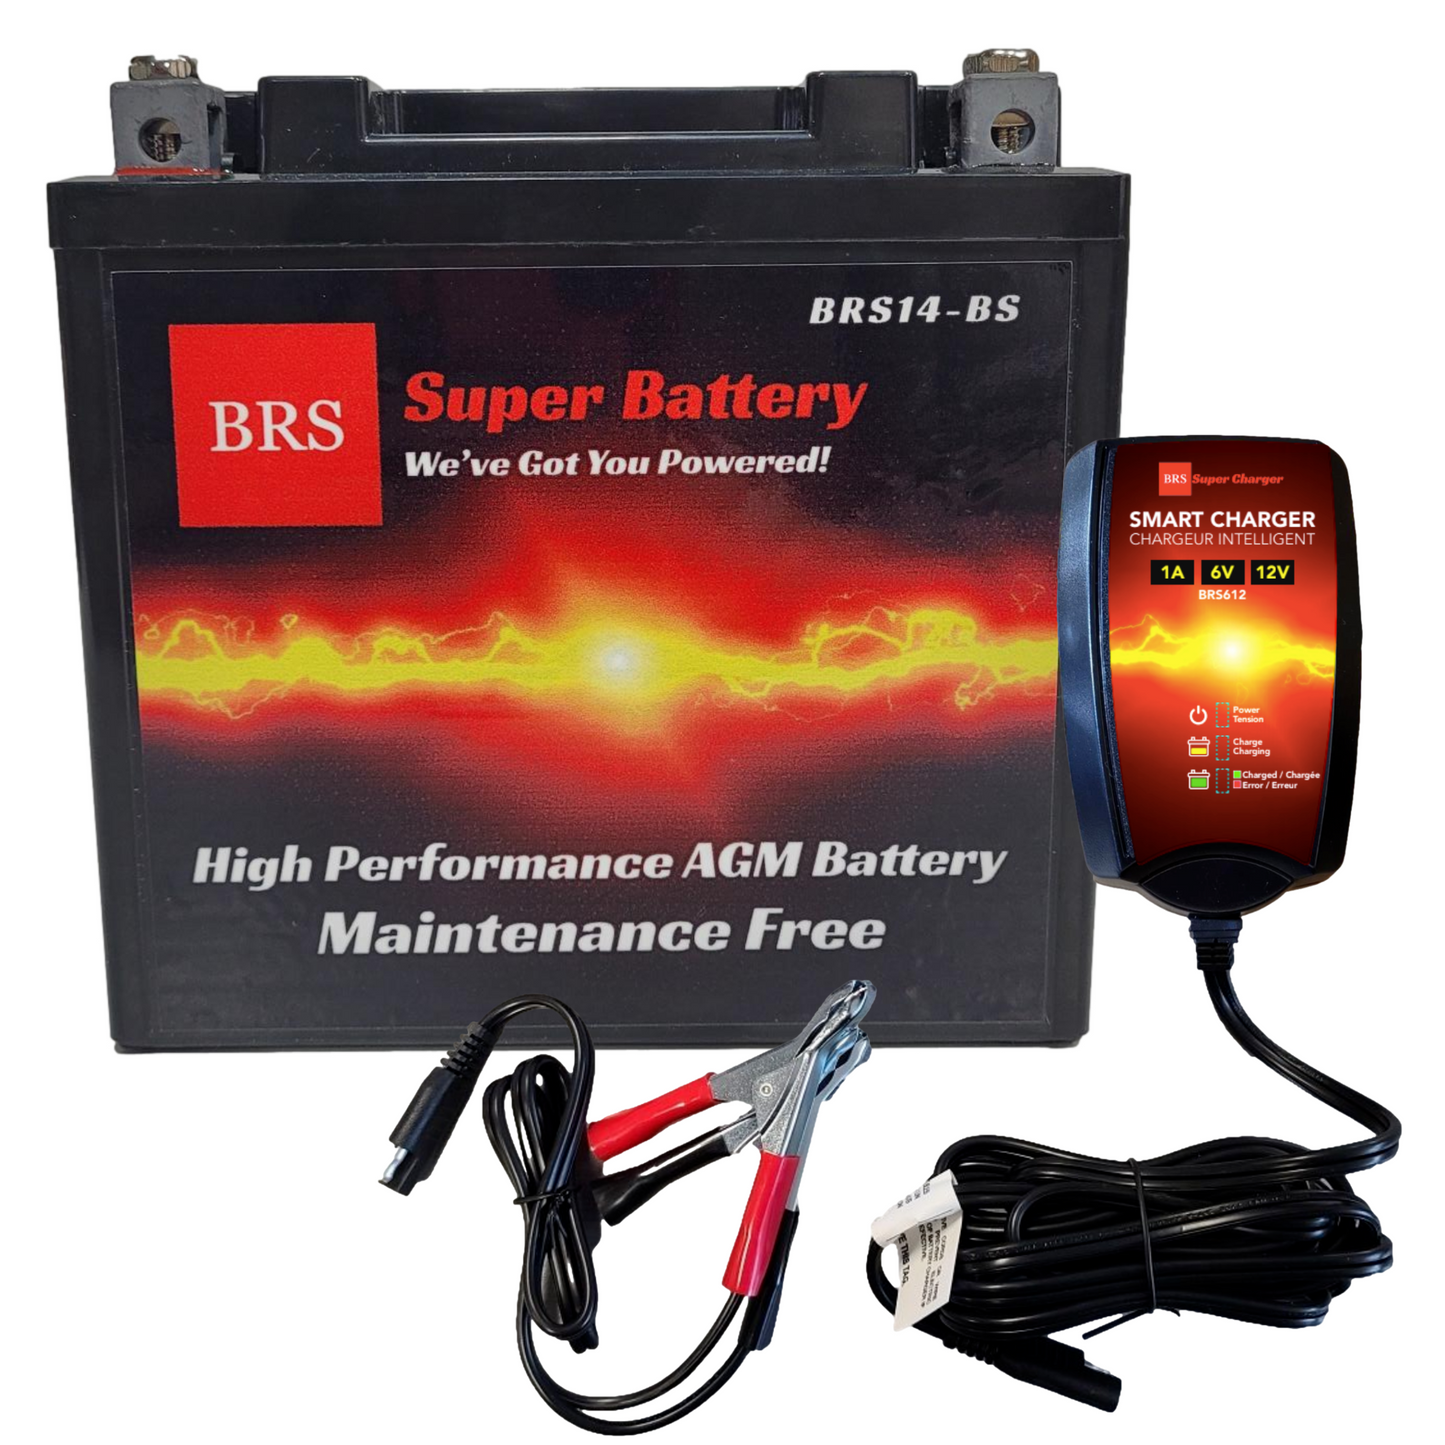 BRS14-BS 30 Day Warranty Battery & Smart Charger / Maintainer Combo Bundle Kit - BRS Super Battery